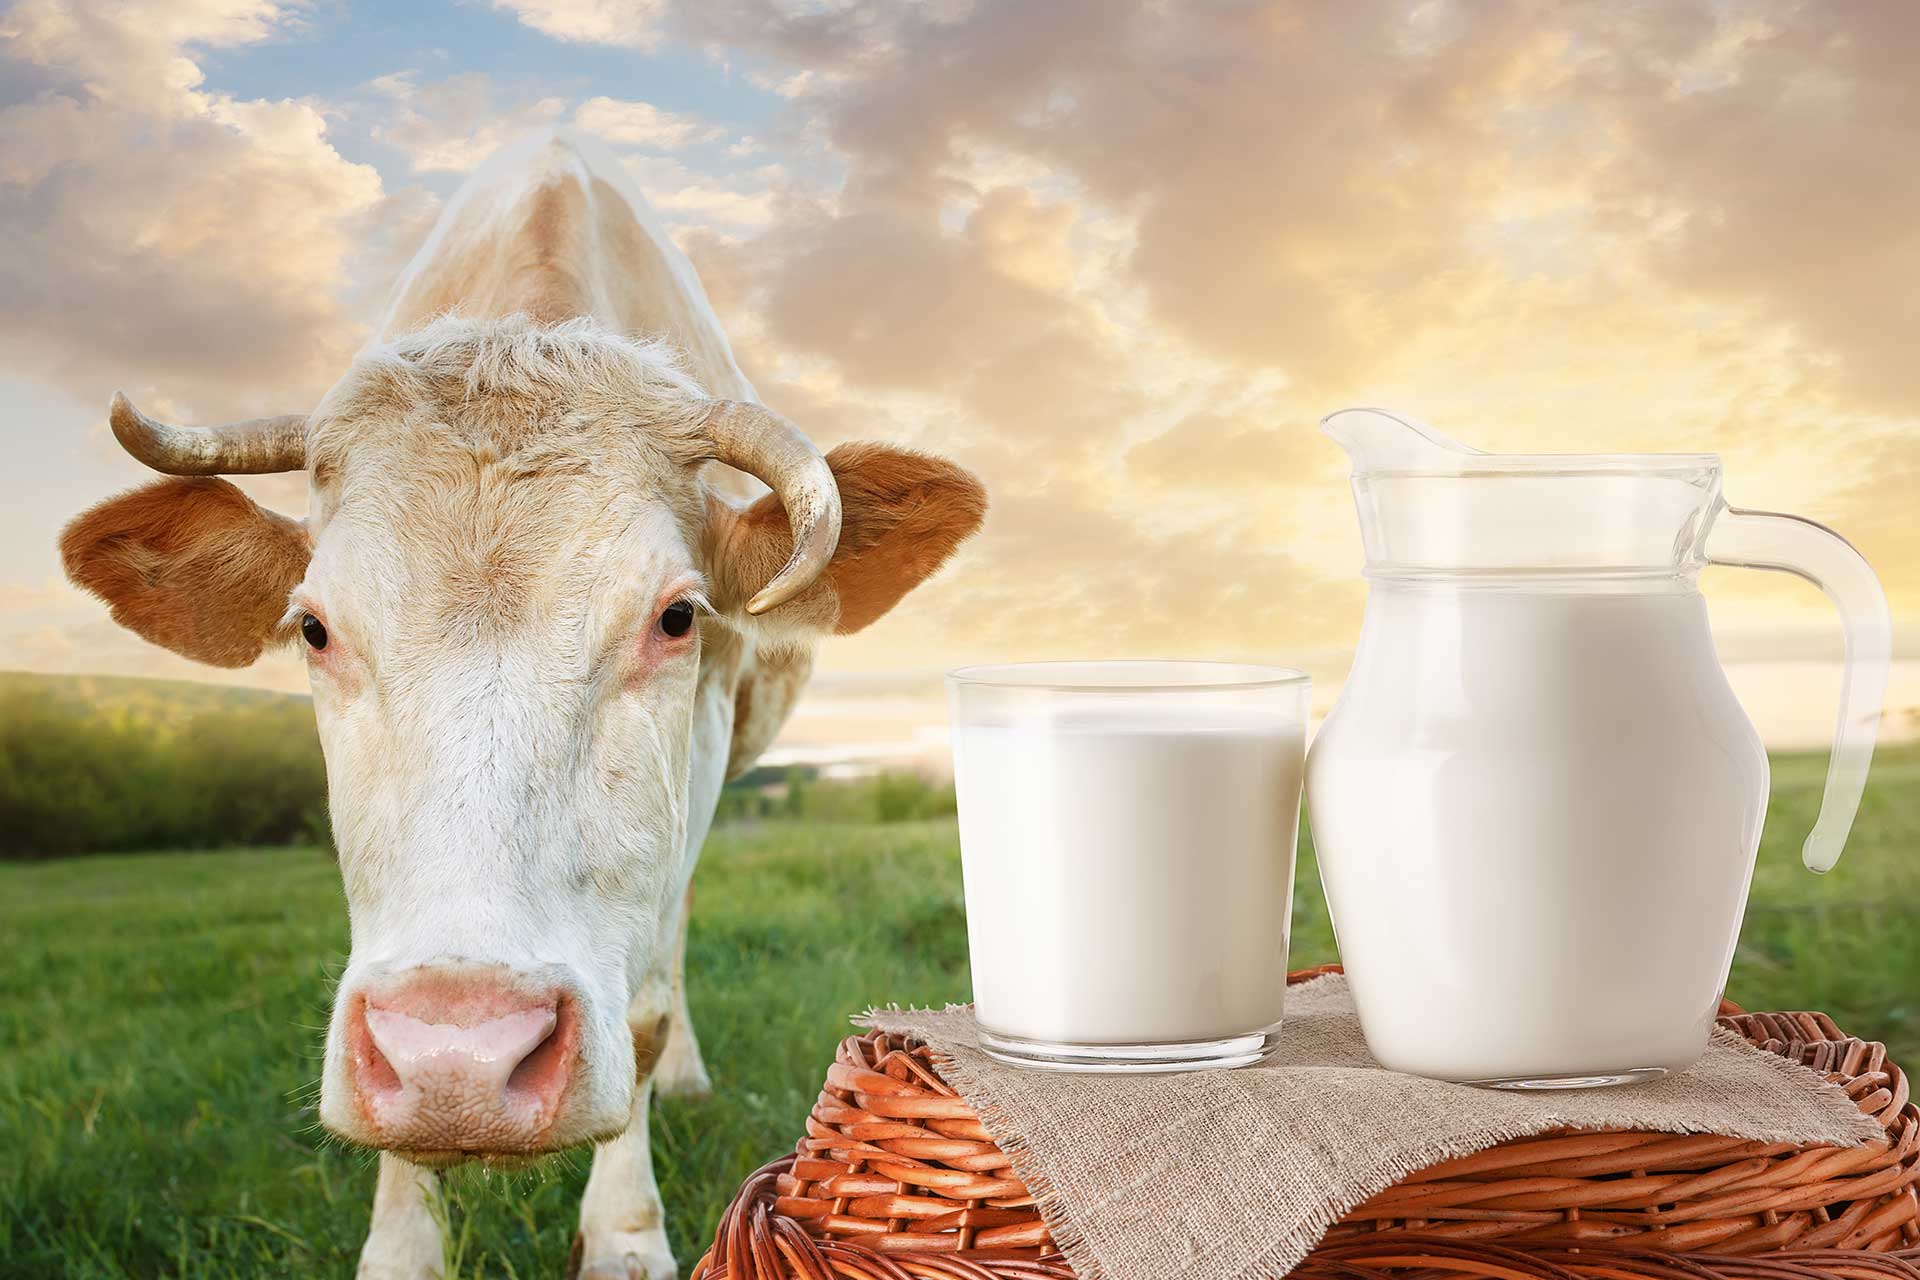 About Us - Global Dairy Platform